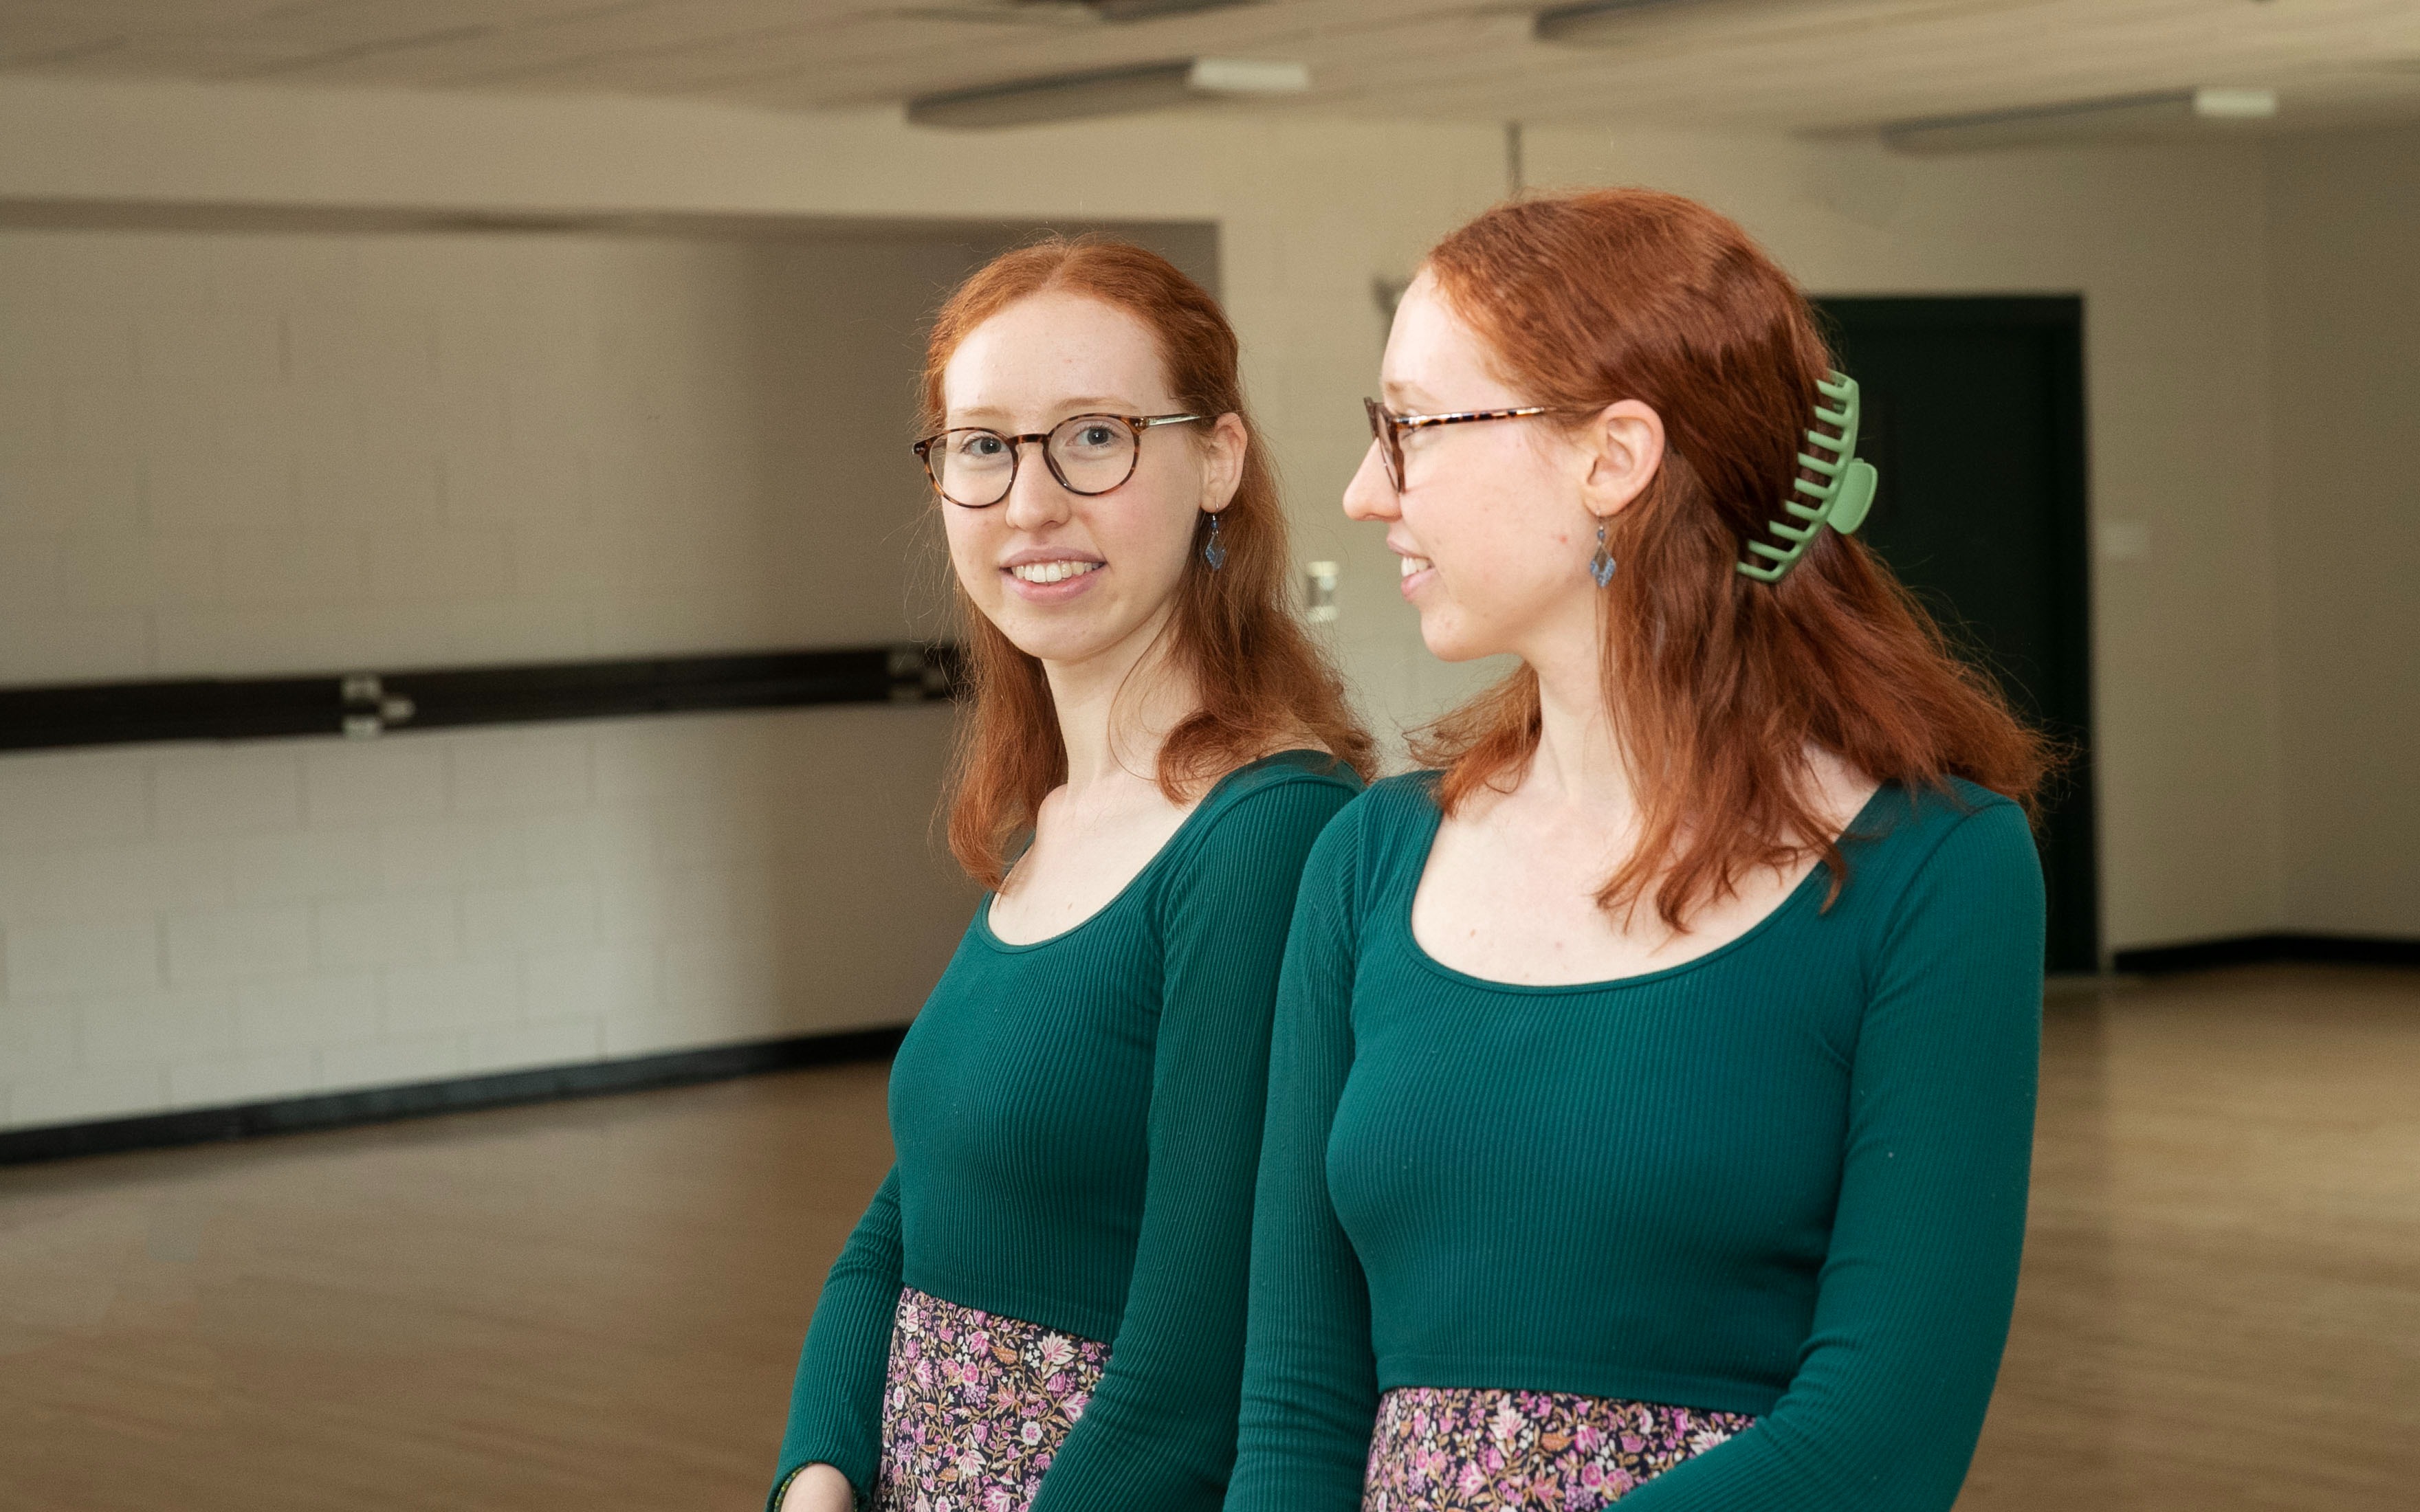 Liz Bracht '24 smiles into a mirror in a dance studio. She is wearing a blue, long sleeved top and a floral skirt.